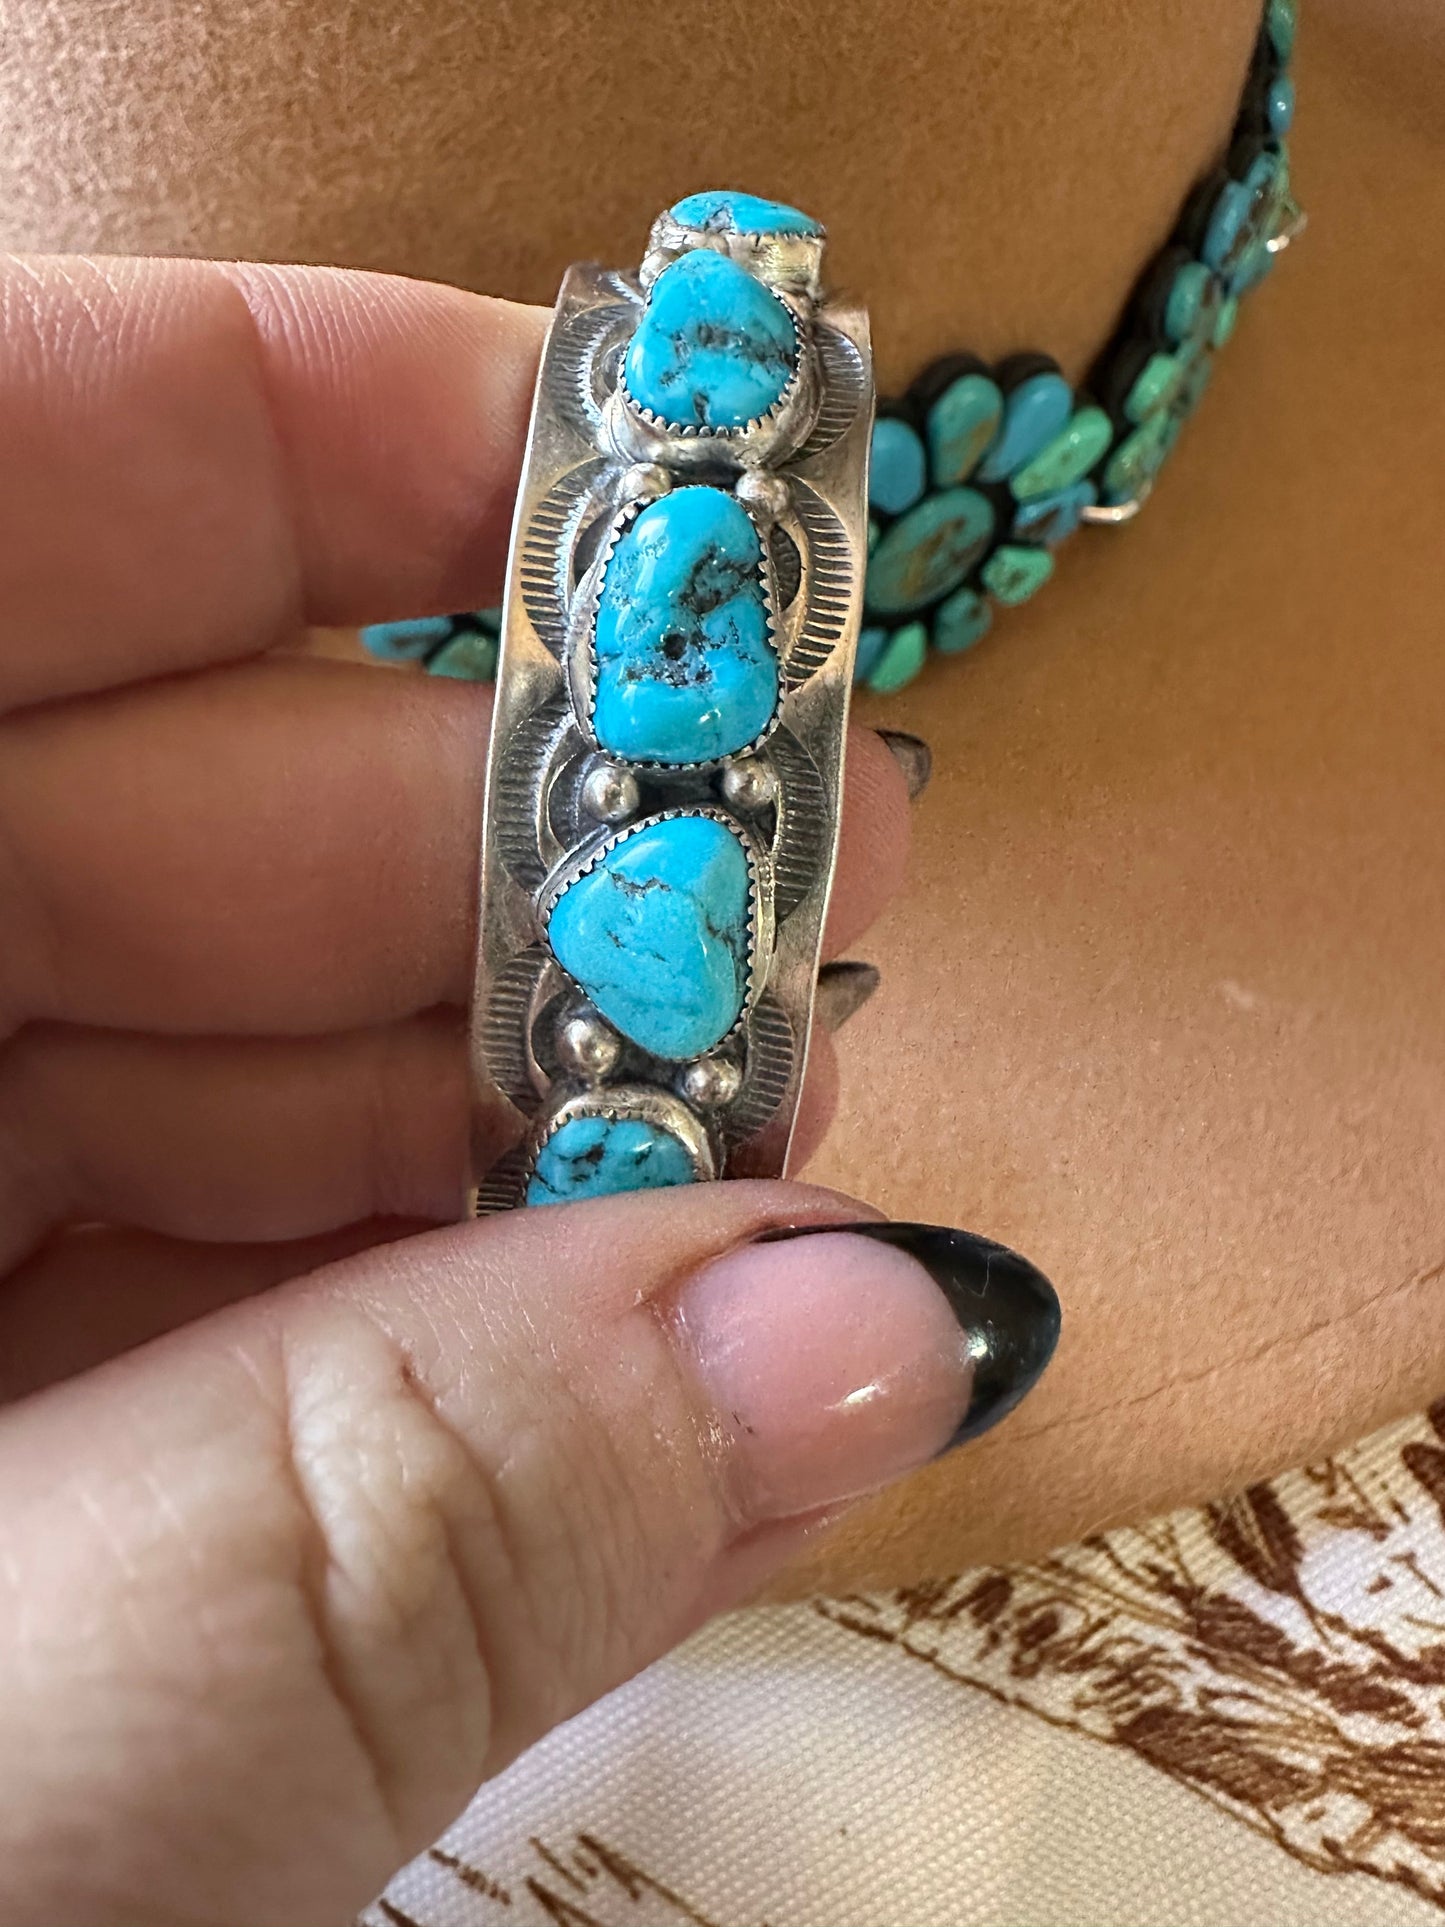 Navajo Turquoise & Sterling Silver Cuff Bracelet Signed B Shorty